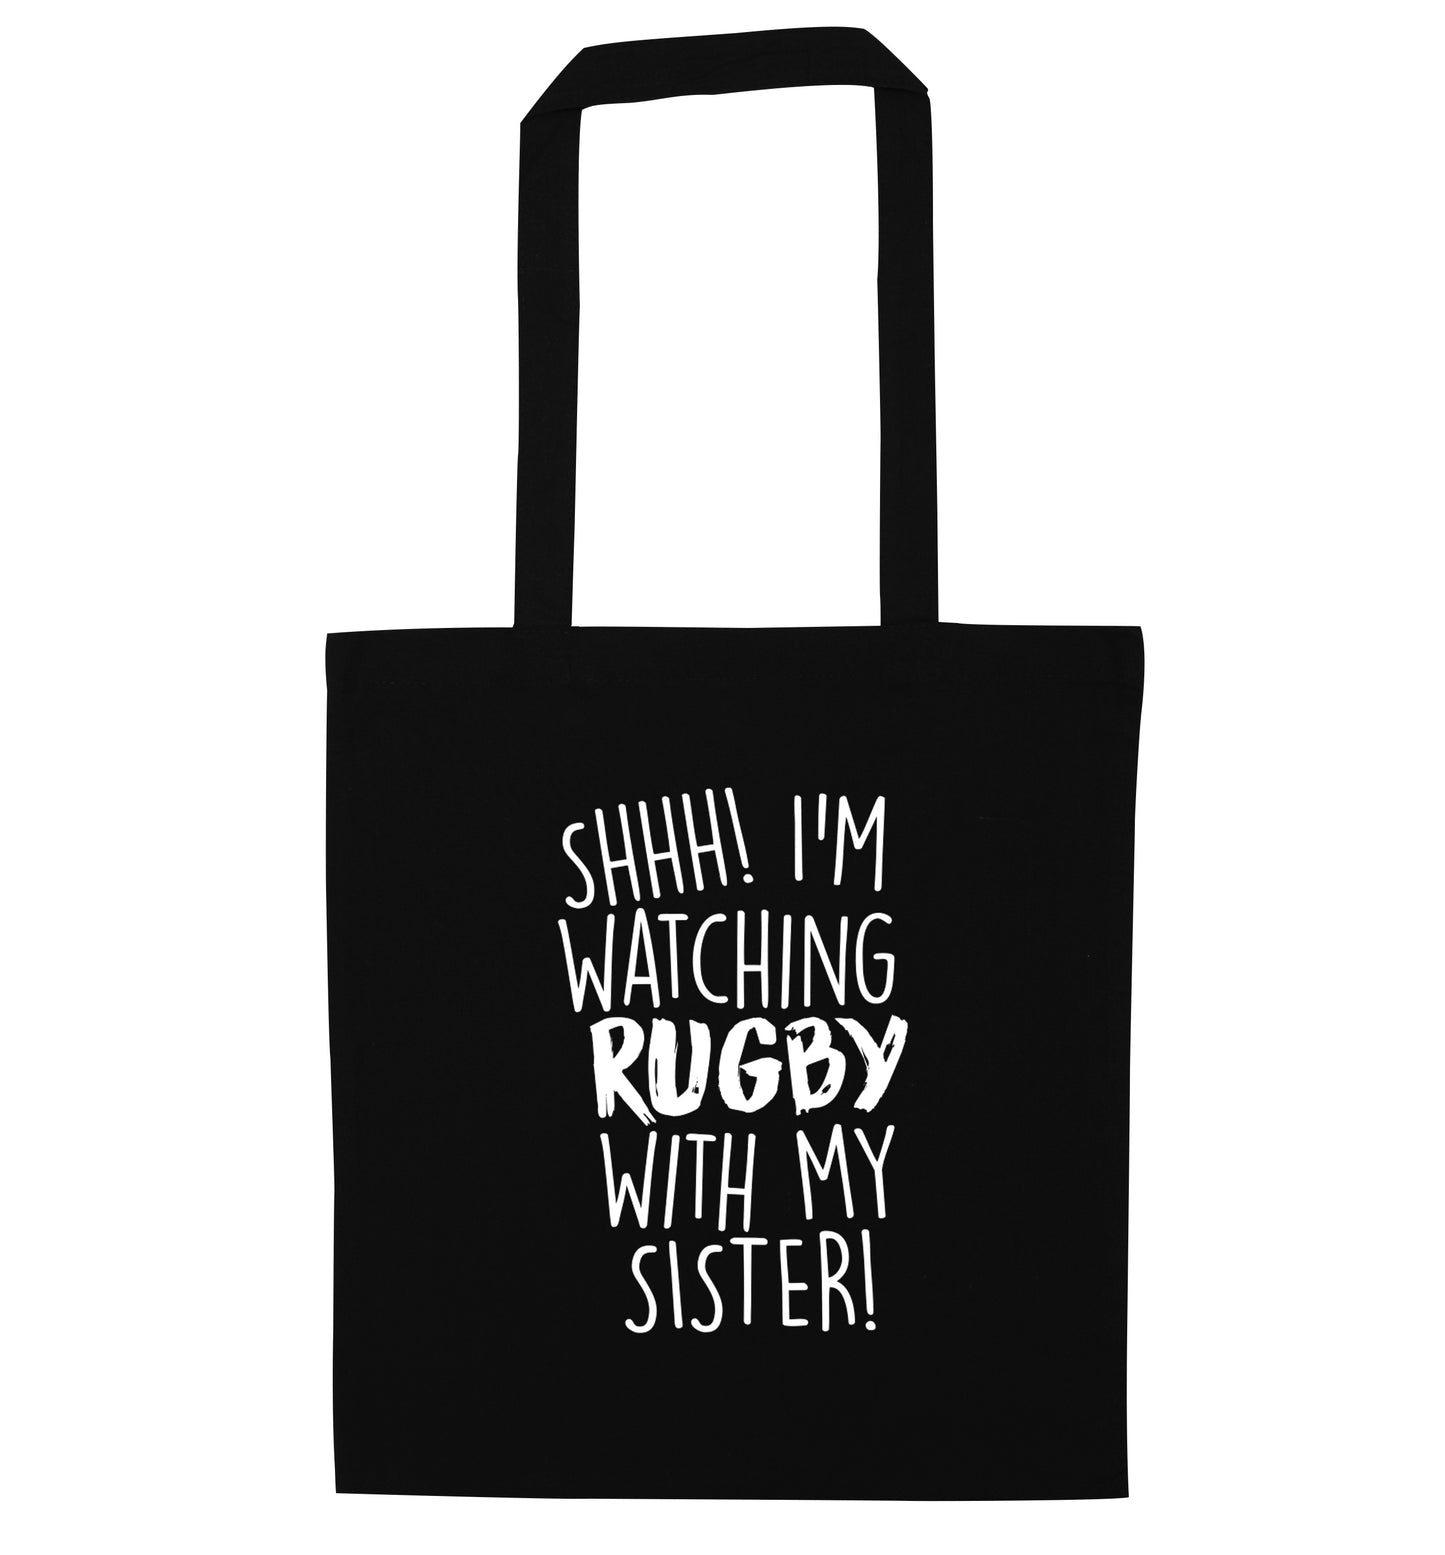 Shh... I'm watching rugby with my sister black tote bag